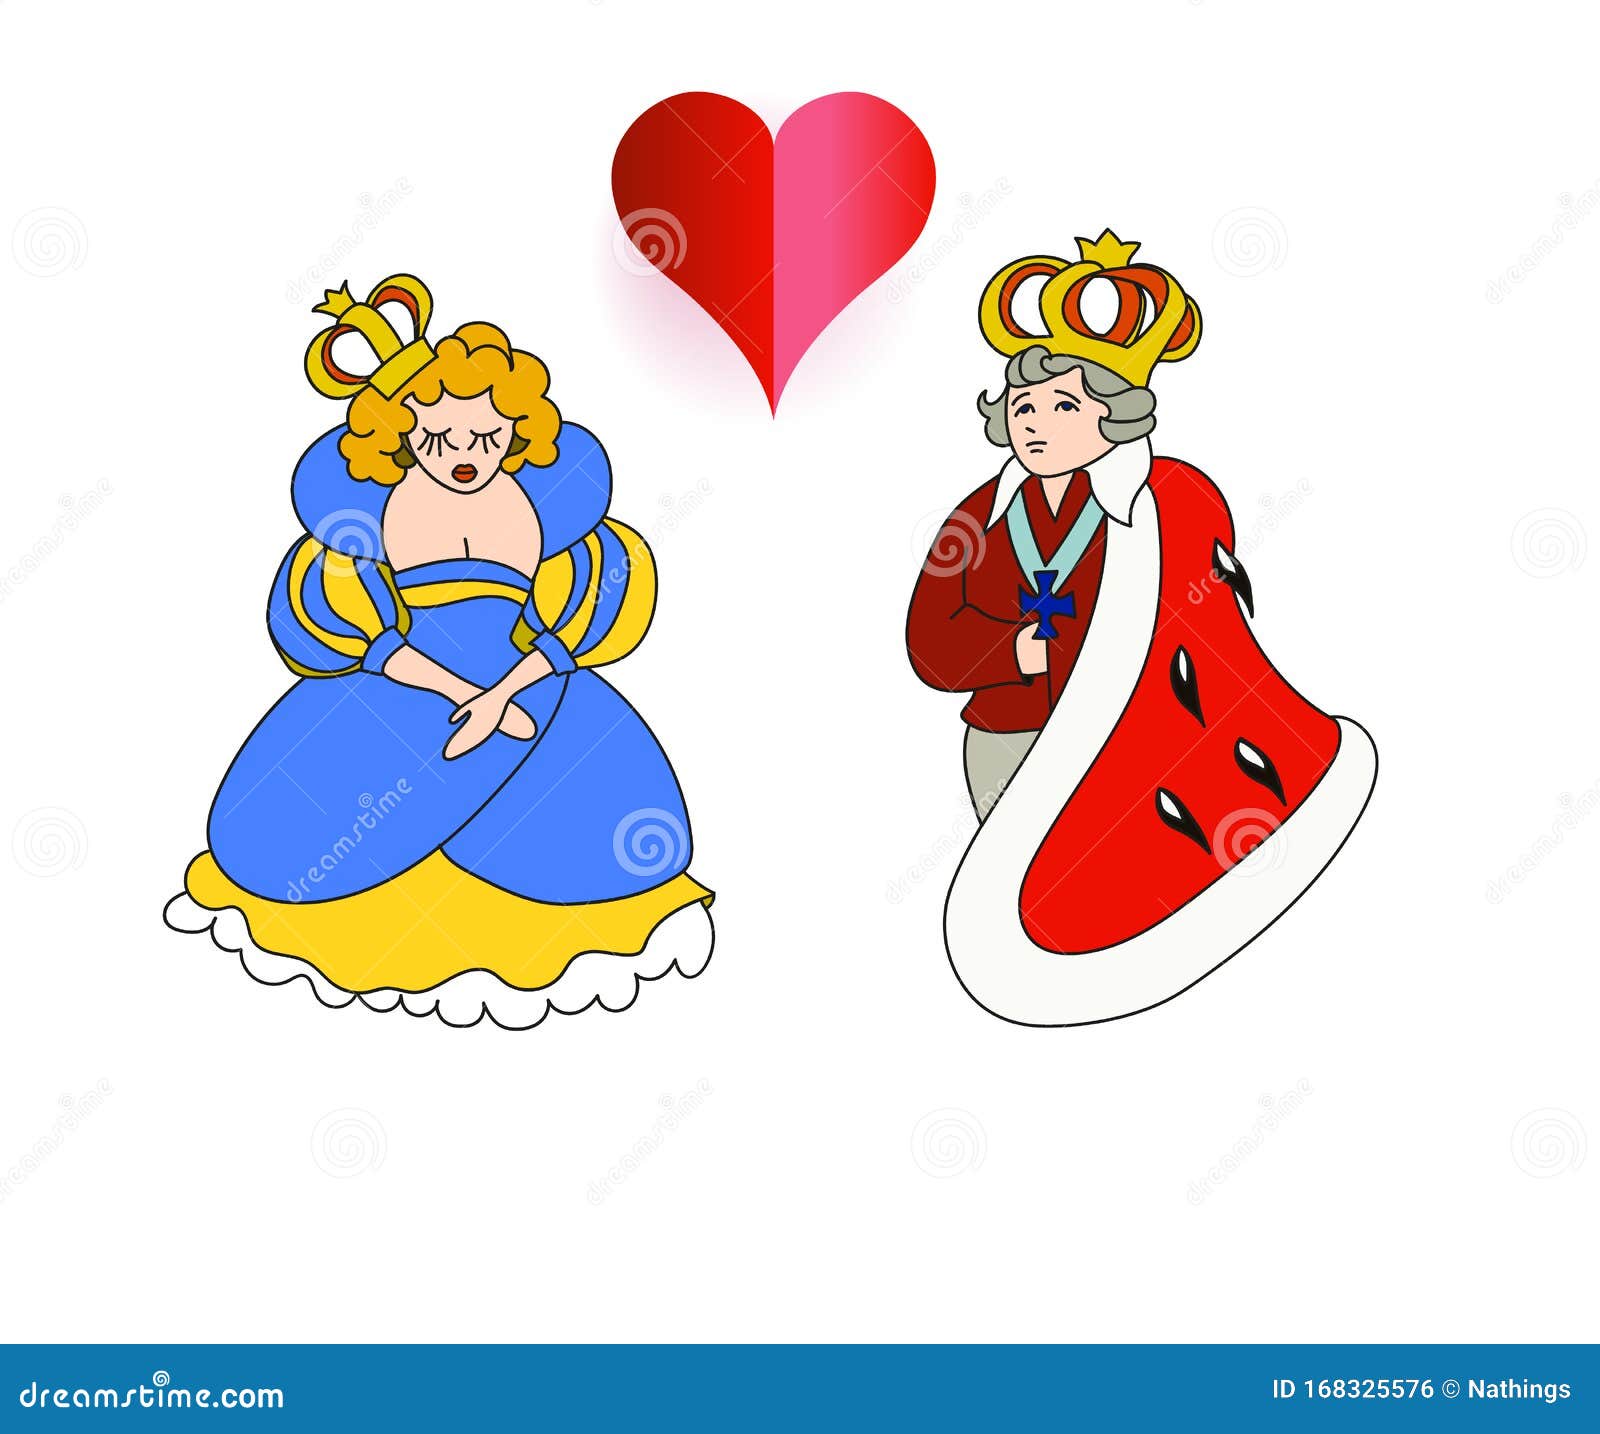 Queen and King in Cartoon Style, Royal Family Empress and Emperor Vector  Children Illustration Stock Vector - Illustration of cute, beautiful:  168325576